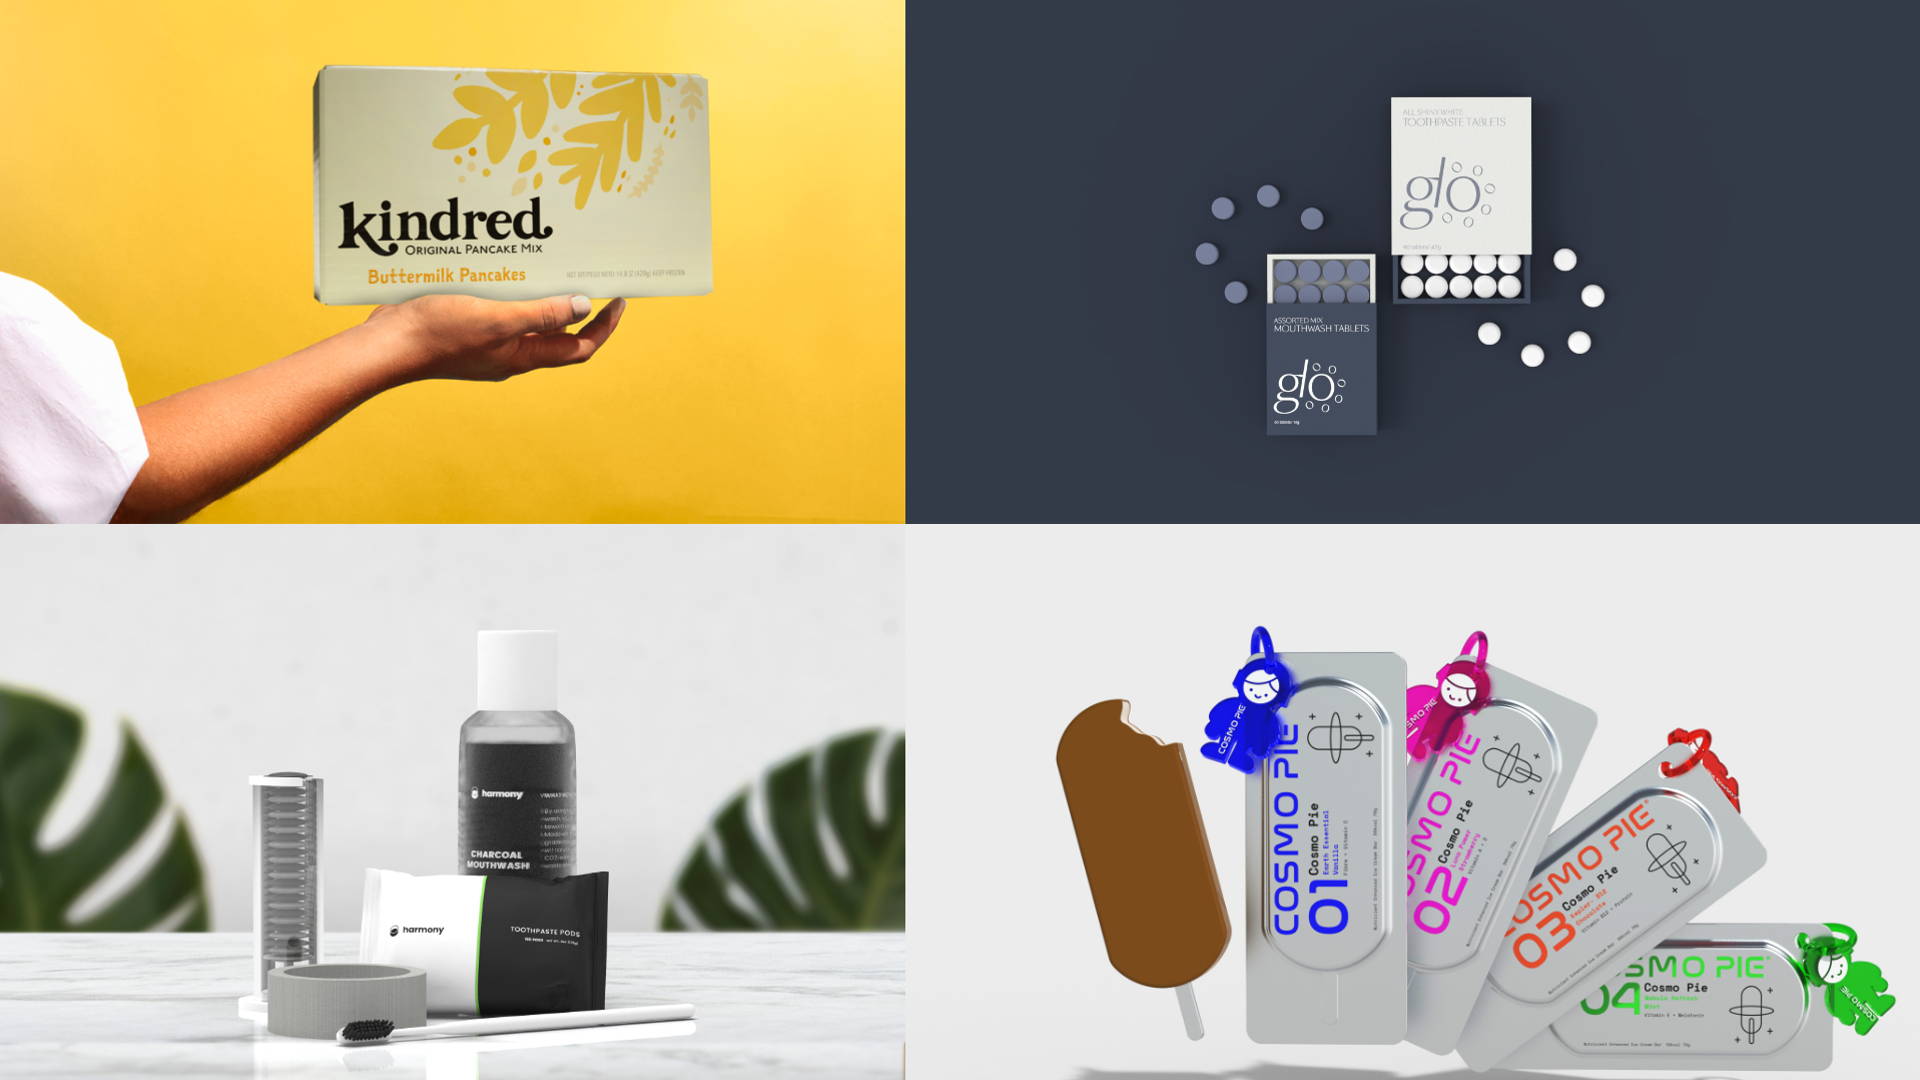 Featured image for 4 ArtCenter Students Redesign Brands With Racist Iconography